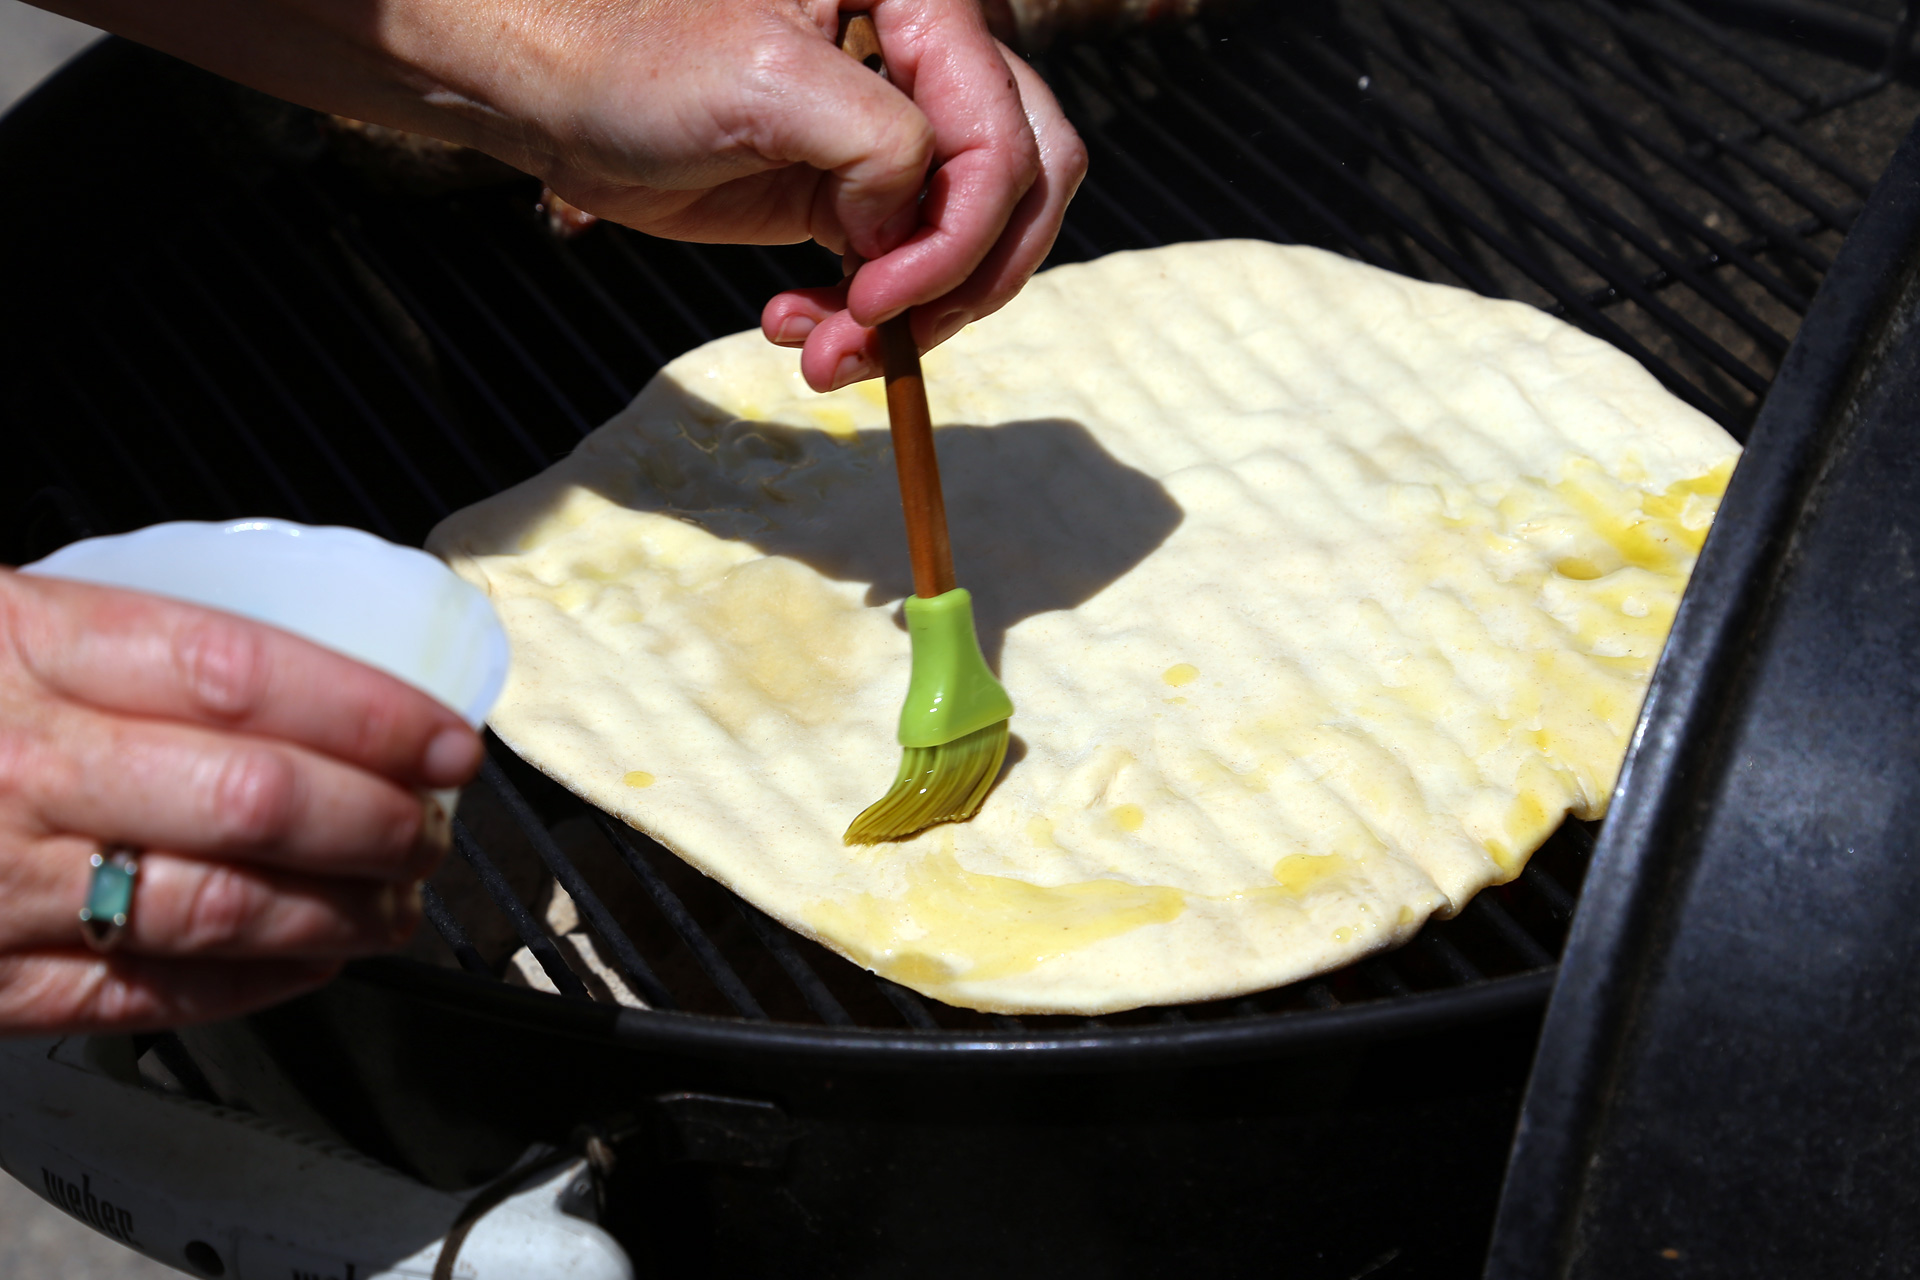 Lay the dough round on the grill, olive oil–side down. Brush the top of the dough lightly with olive oil.